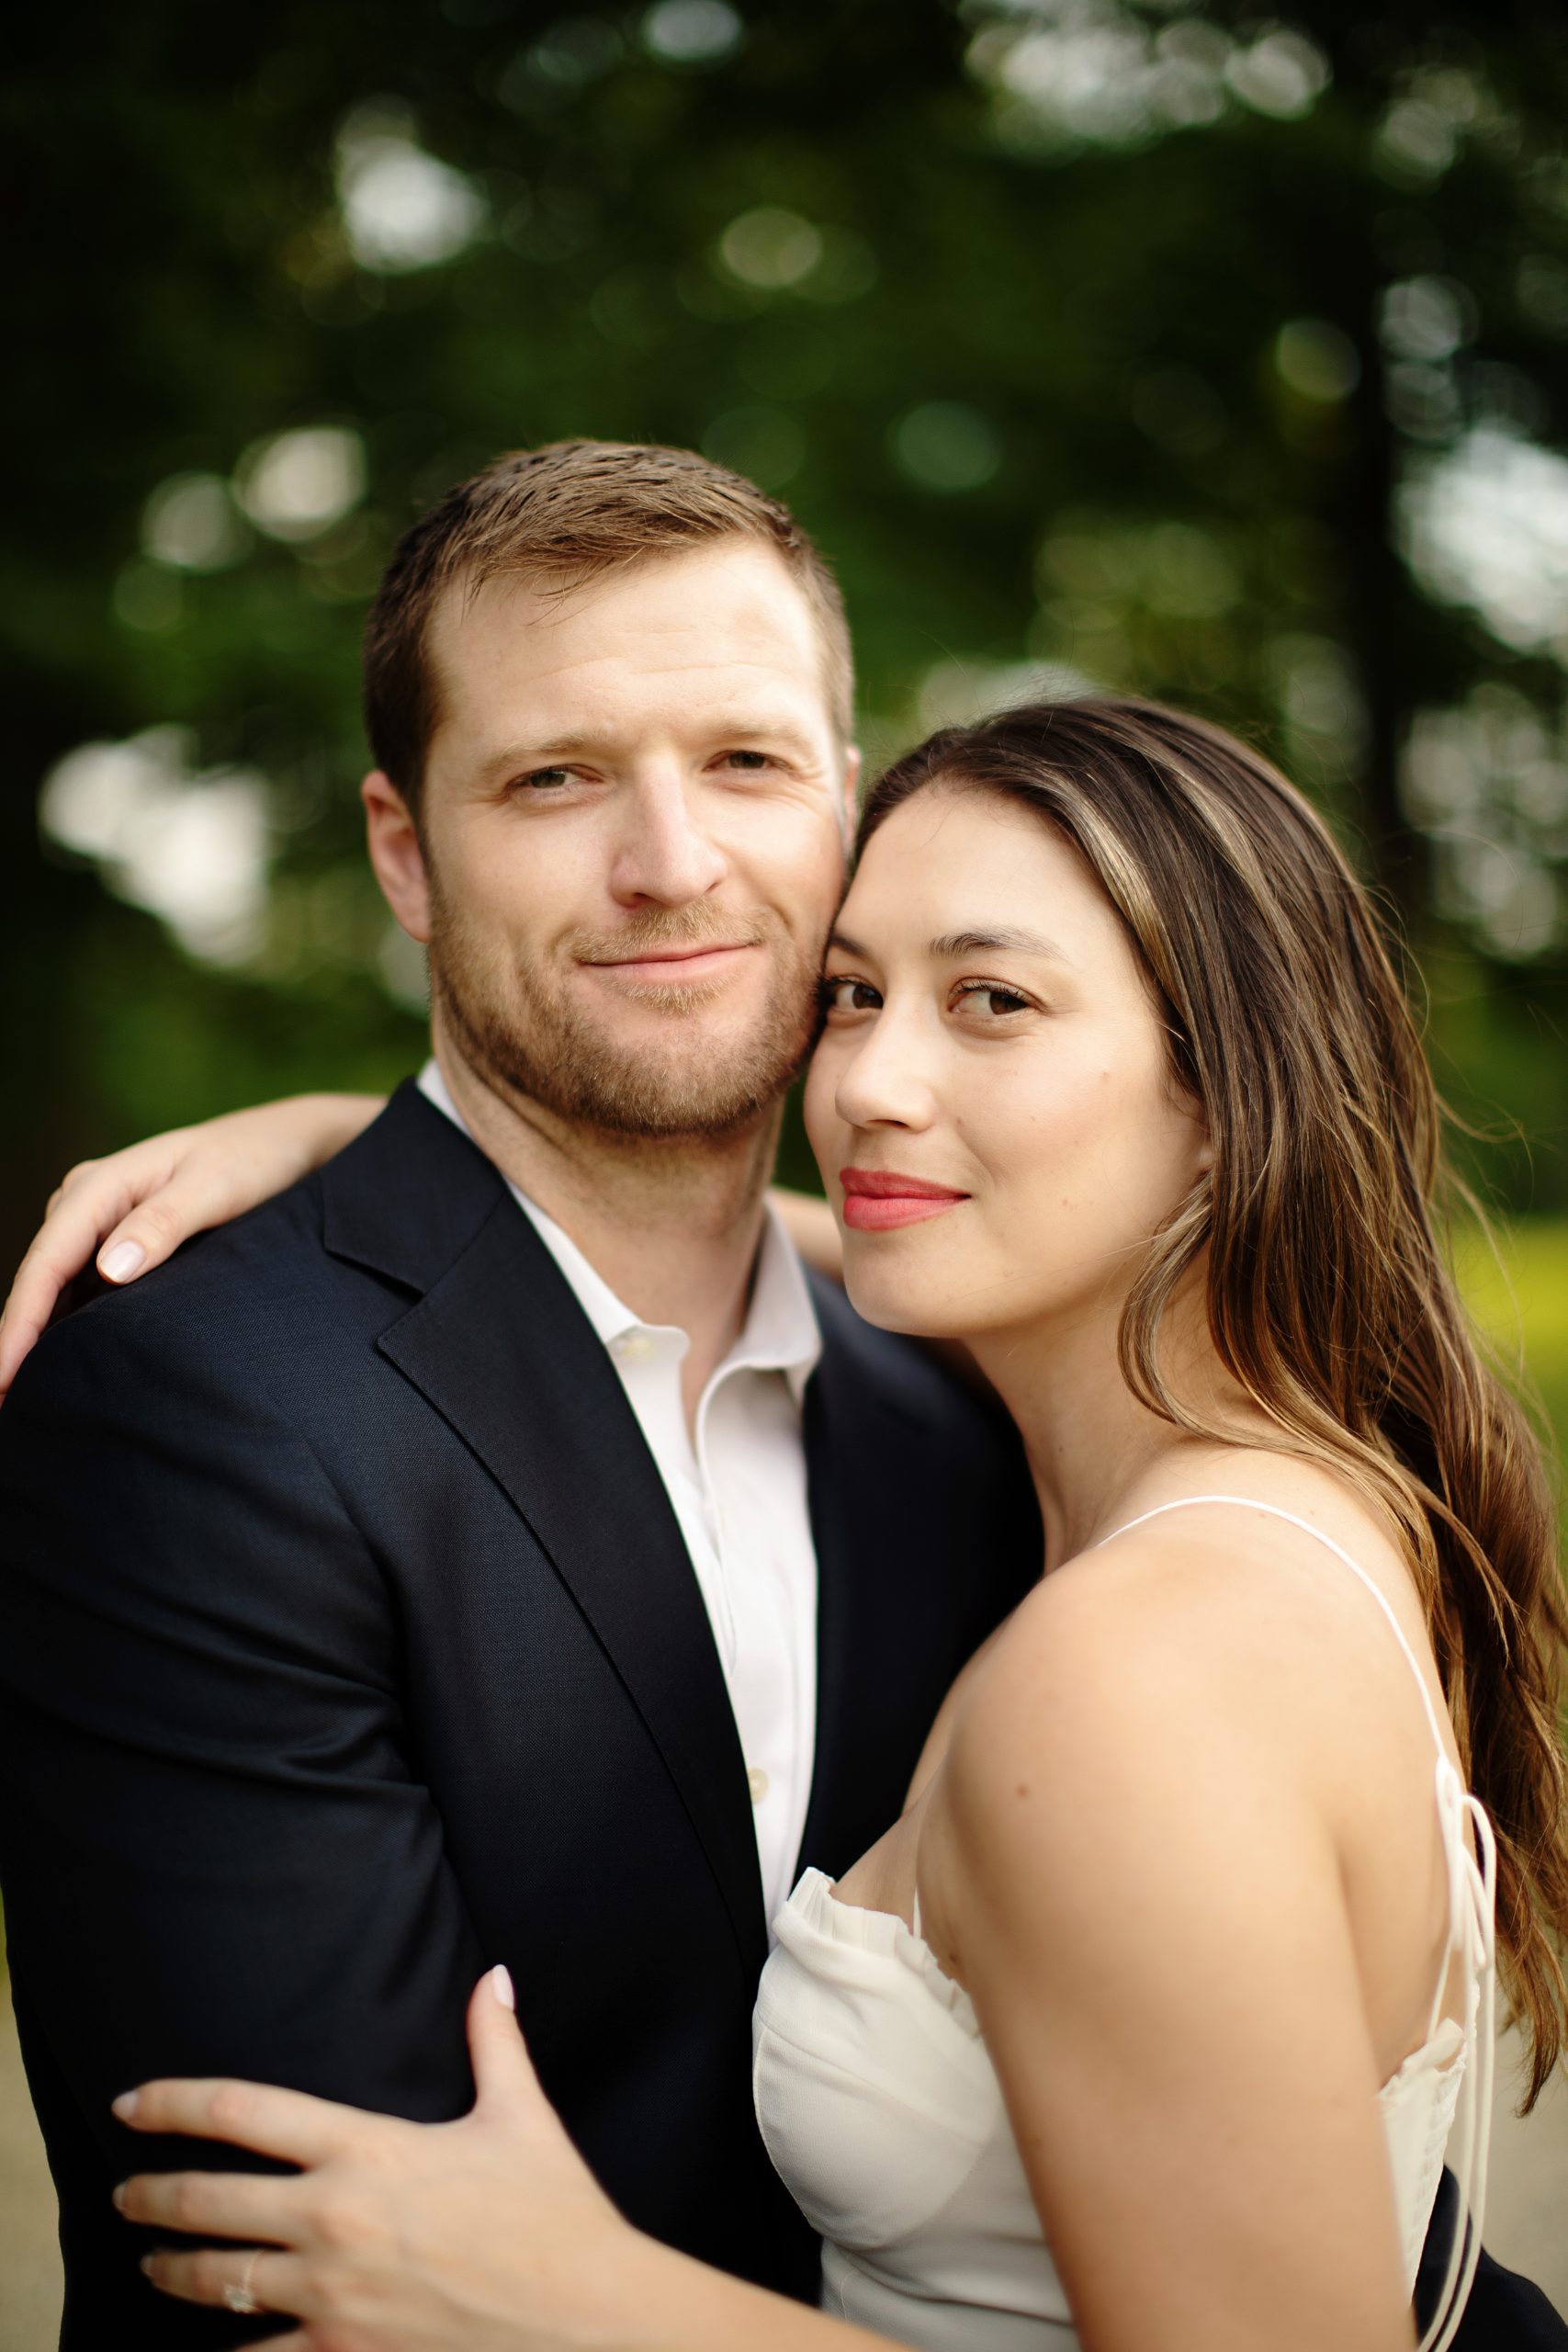 The Highlands Mansion and Gardens Engagement Photos-Philadelphia Engagement and Wedding Photographer, Highlands Mansion Wedding and Elopement Photographer